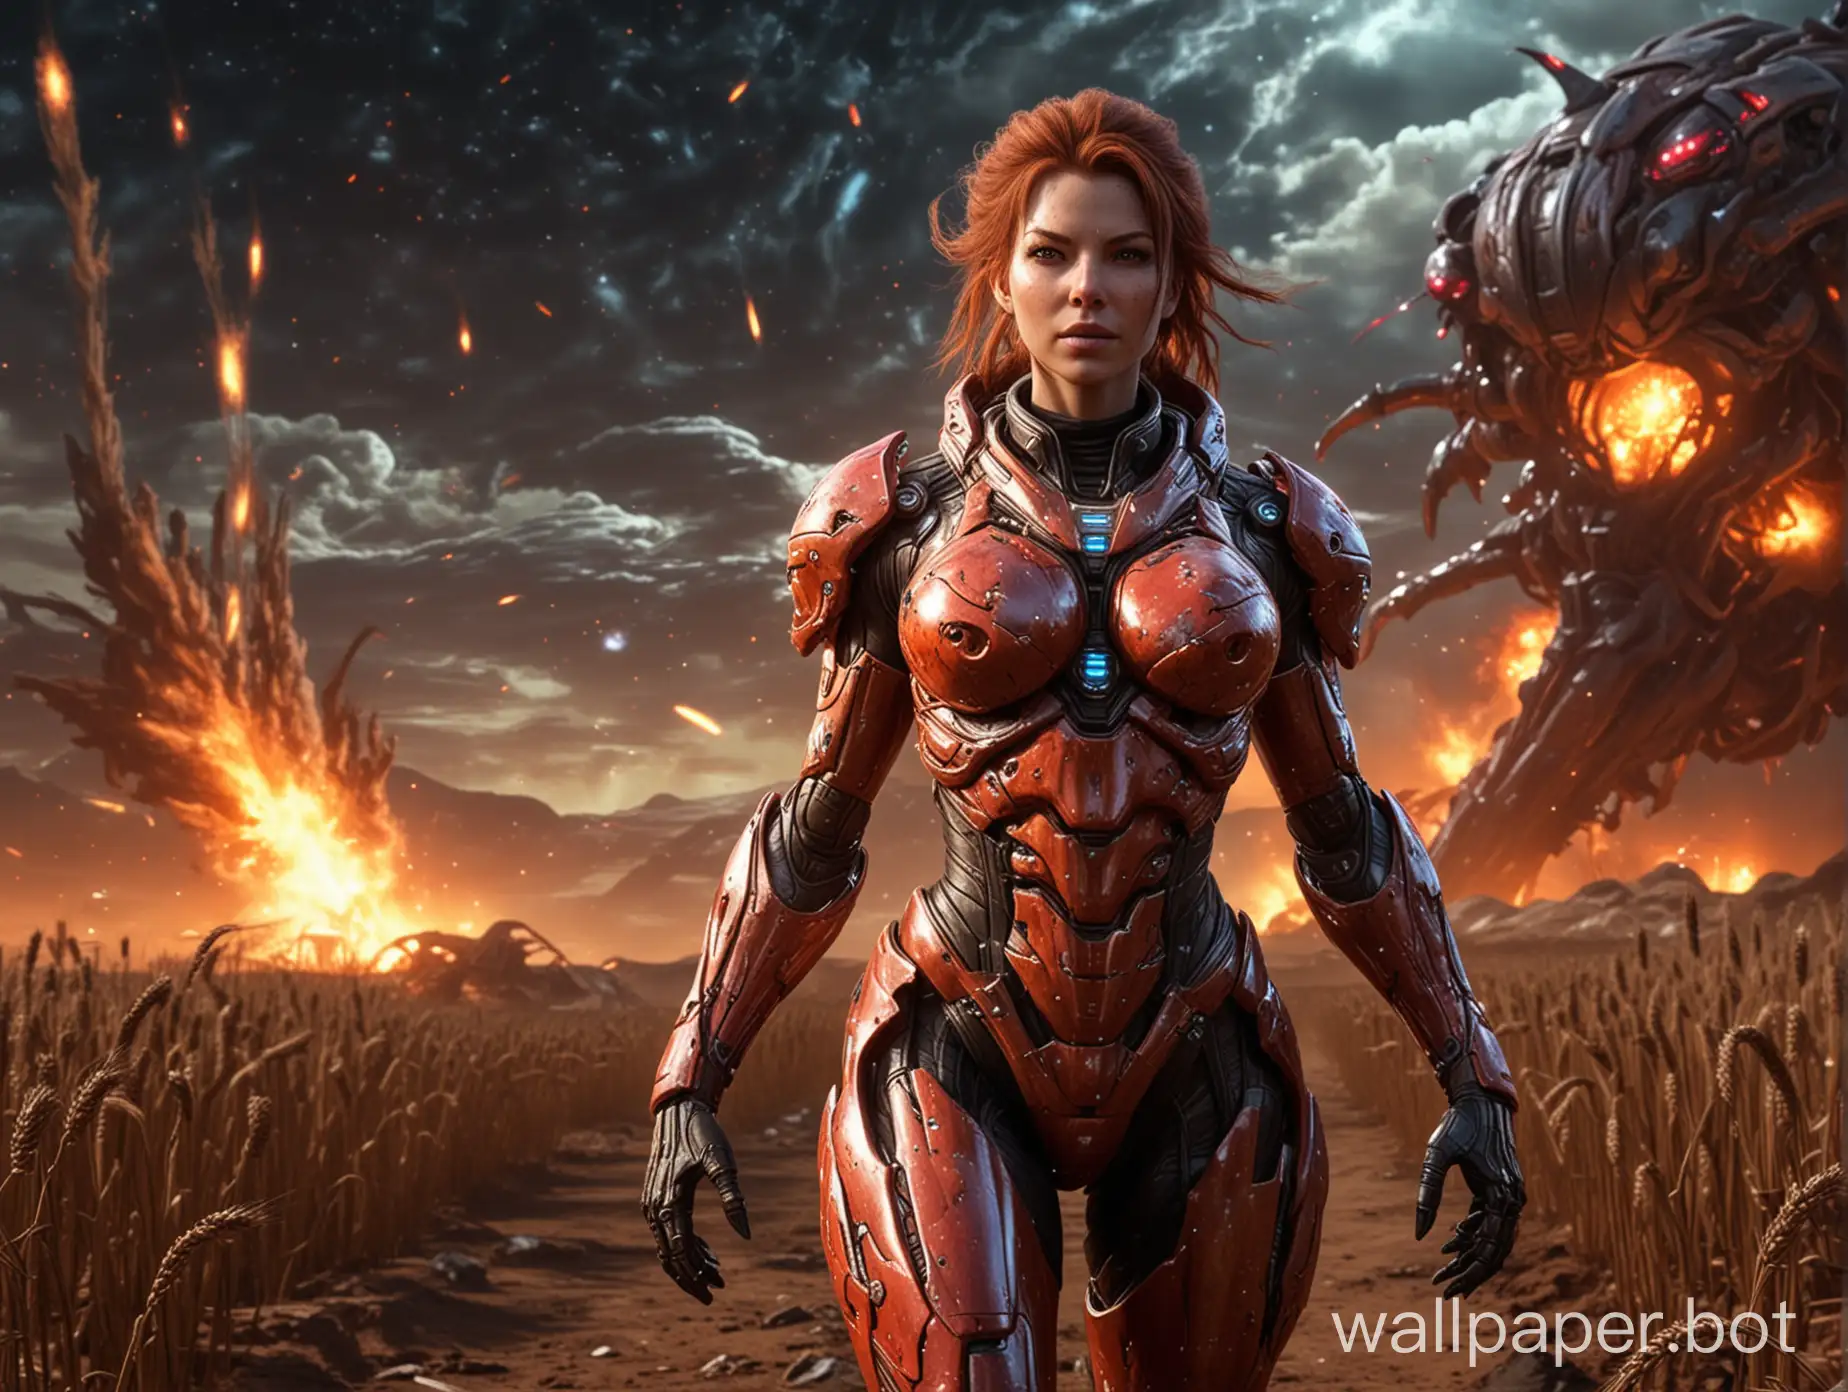 Futuristic-Sarah-Kerrigan-on-Alien-Planet-with-Glowing-Eyes-and-Explosions